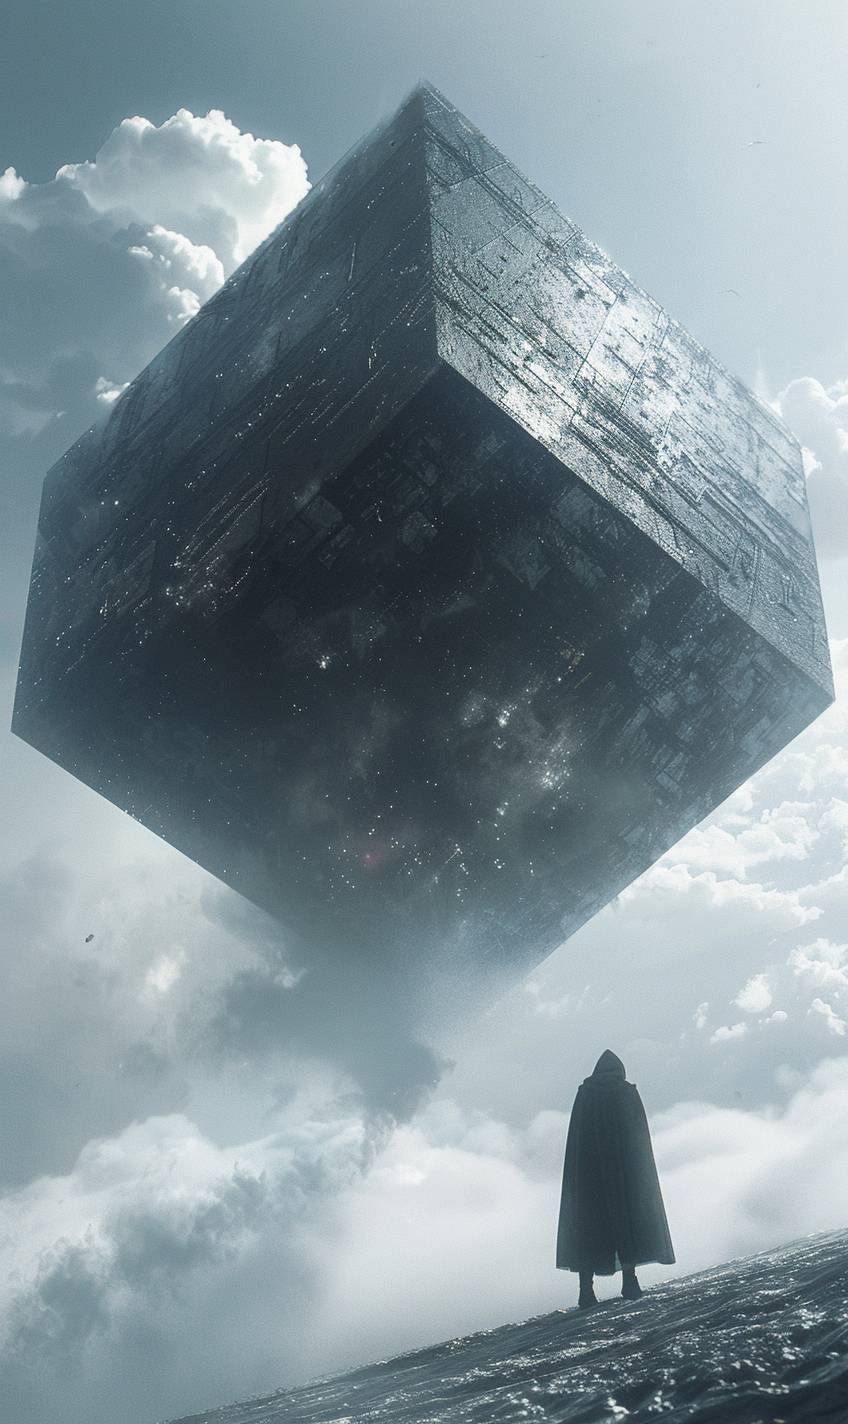 A tall slender dark steel octahedron floating above in the sky, ominous, top half of the octahedron has a steeper taller angle than the bottom half.